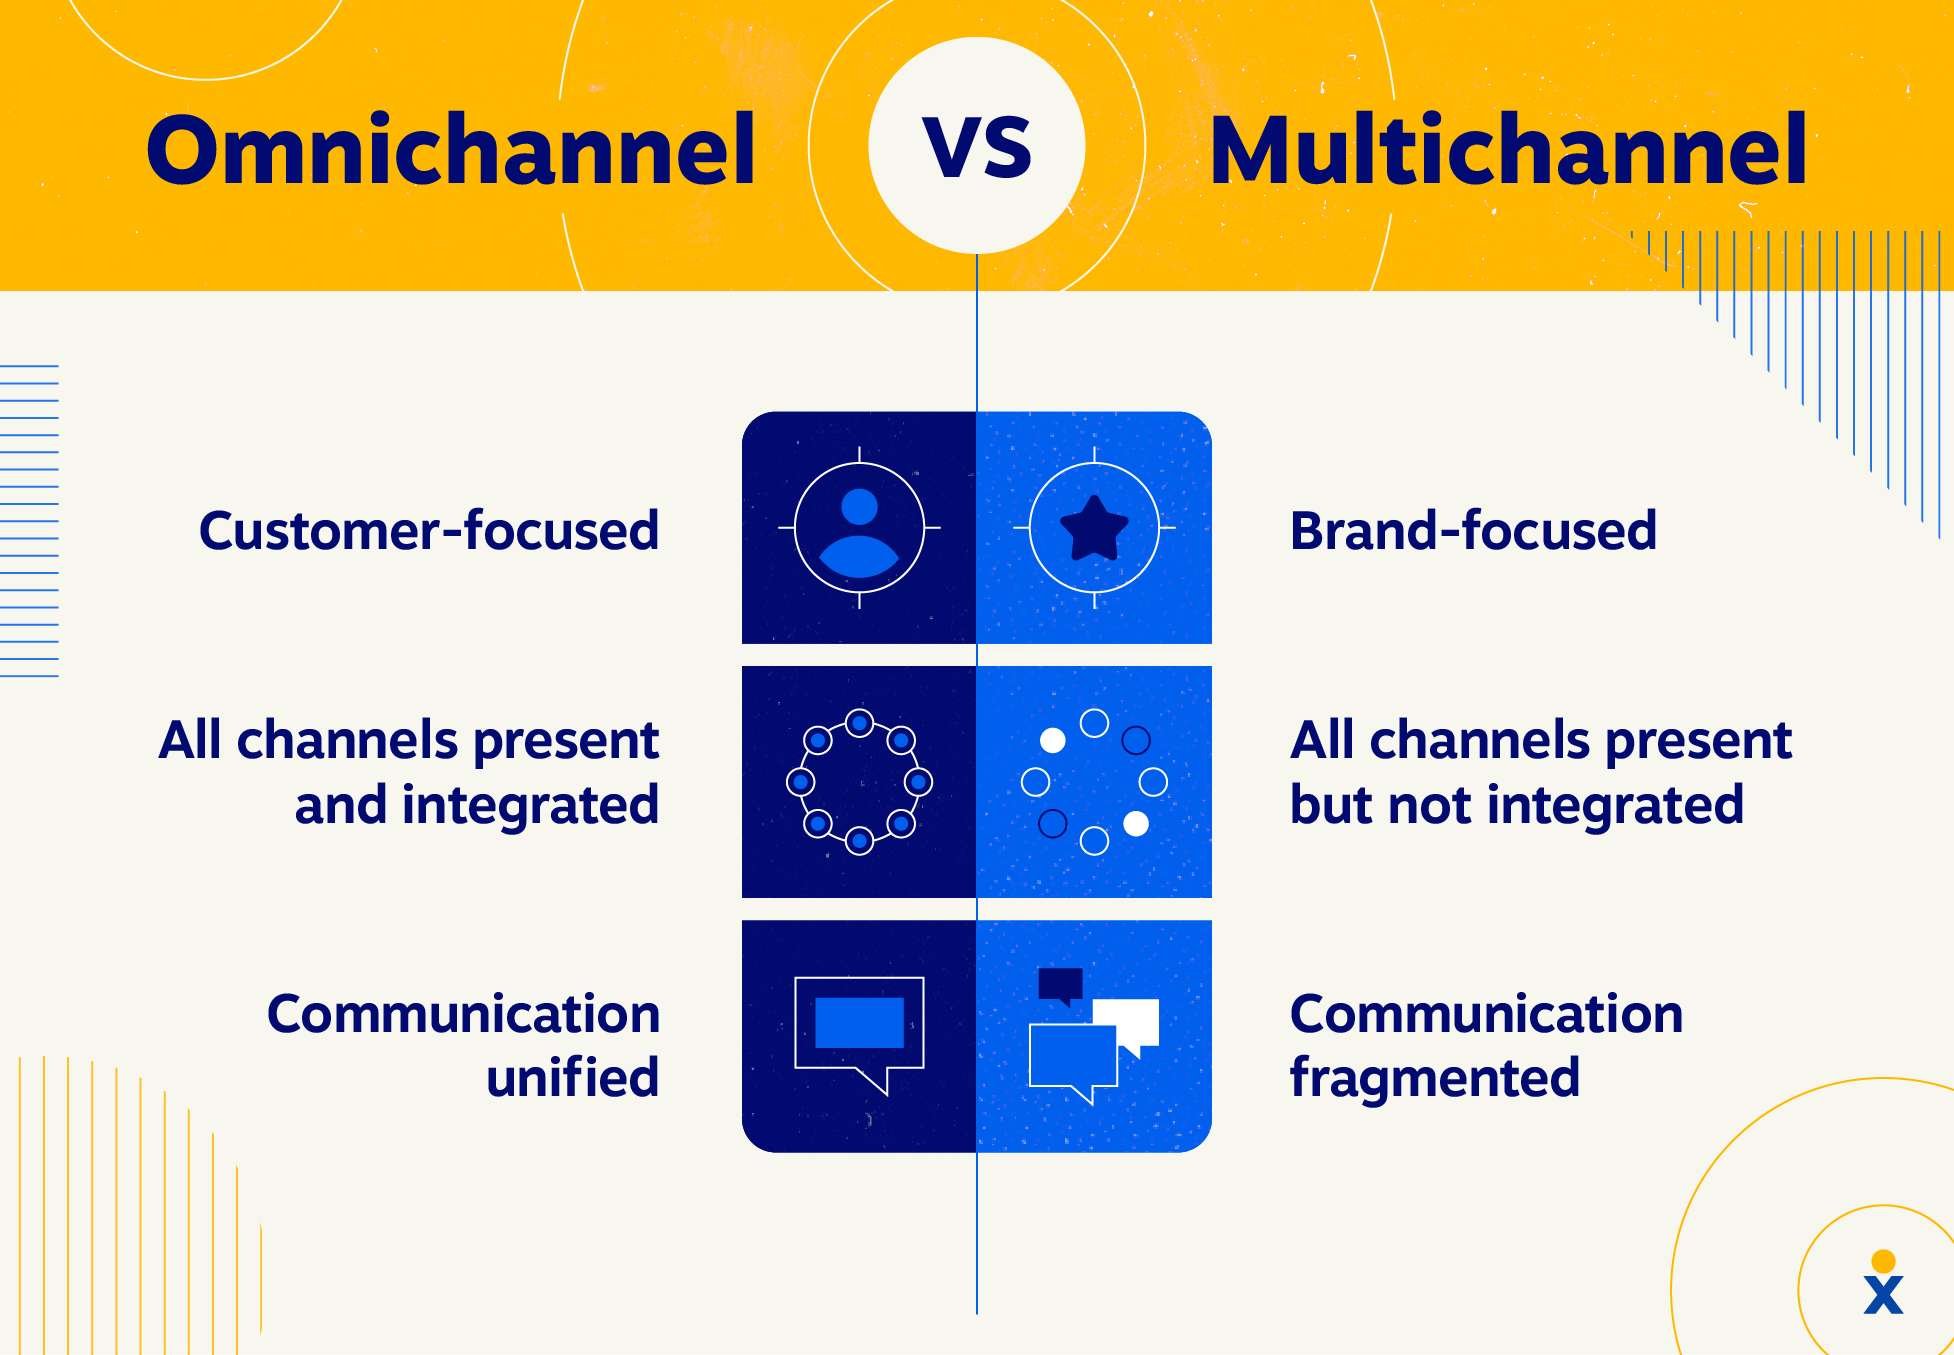 Comparing omnichannel vs multichannel call centers side-by-side.